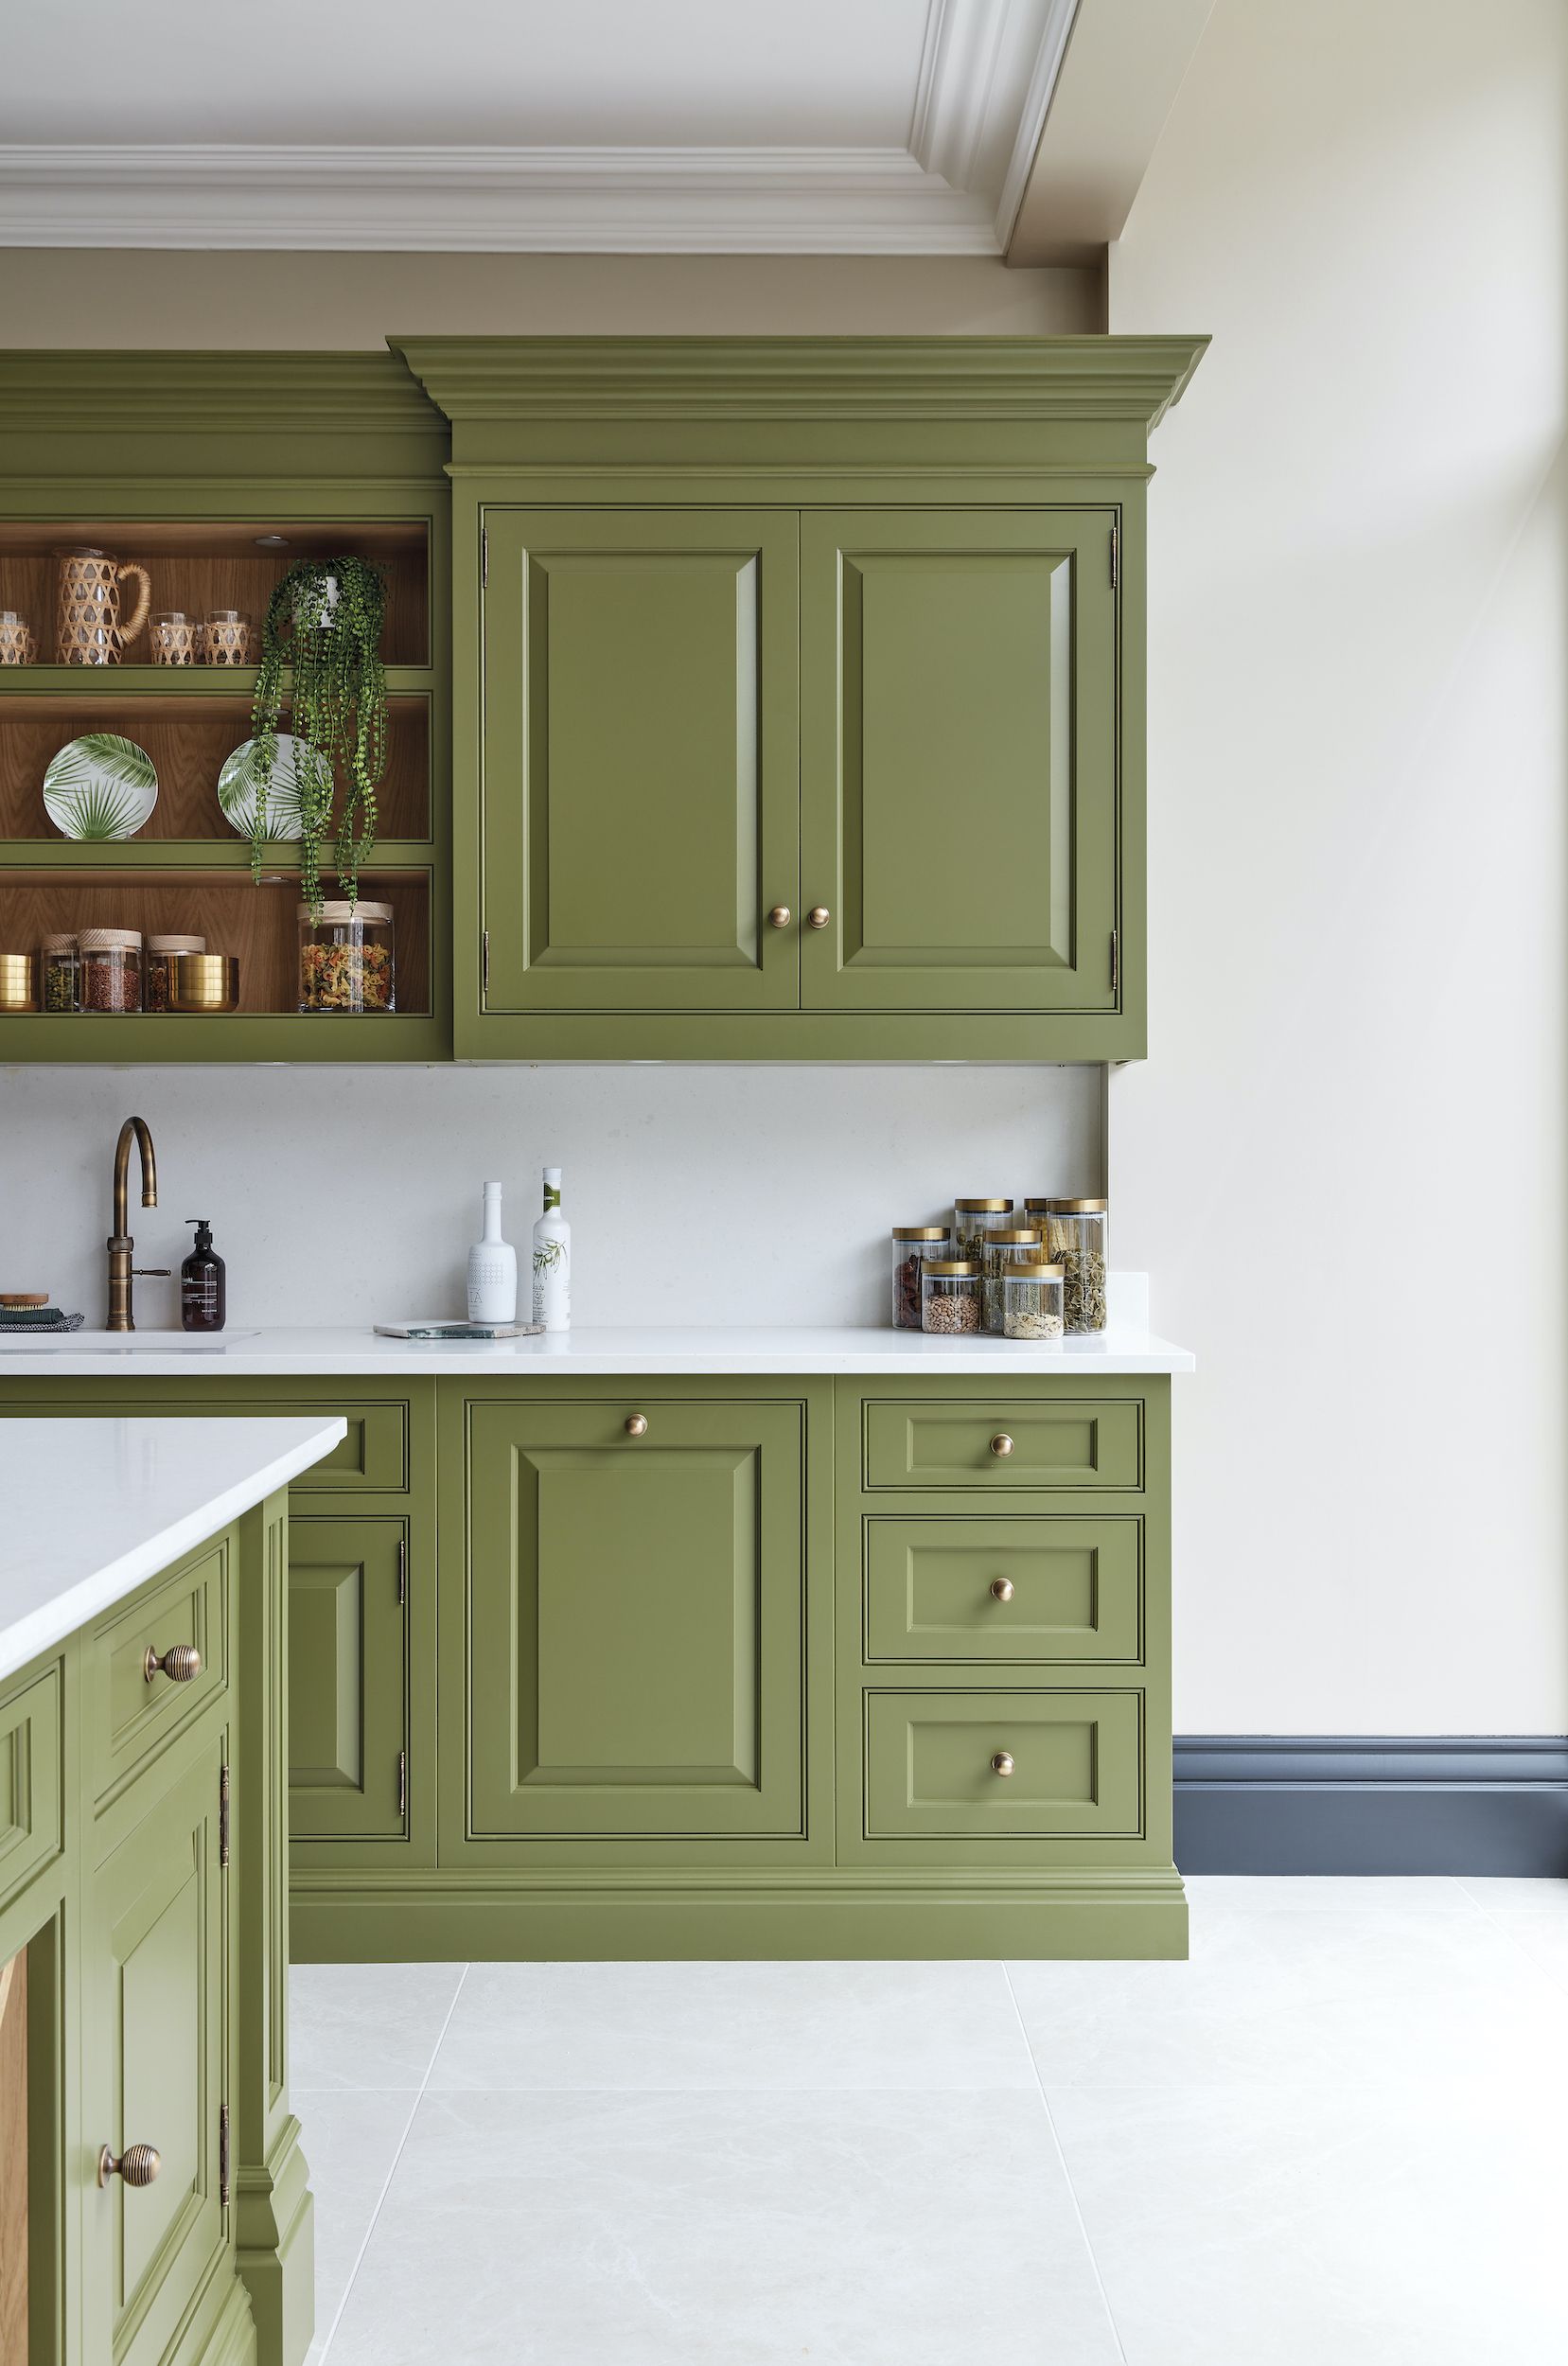 Give Your Kitchen a Modern, Streamlined Look by Concealing Your